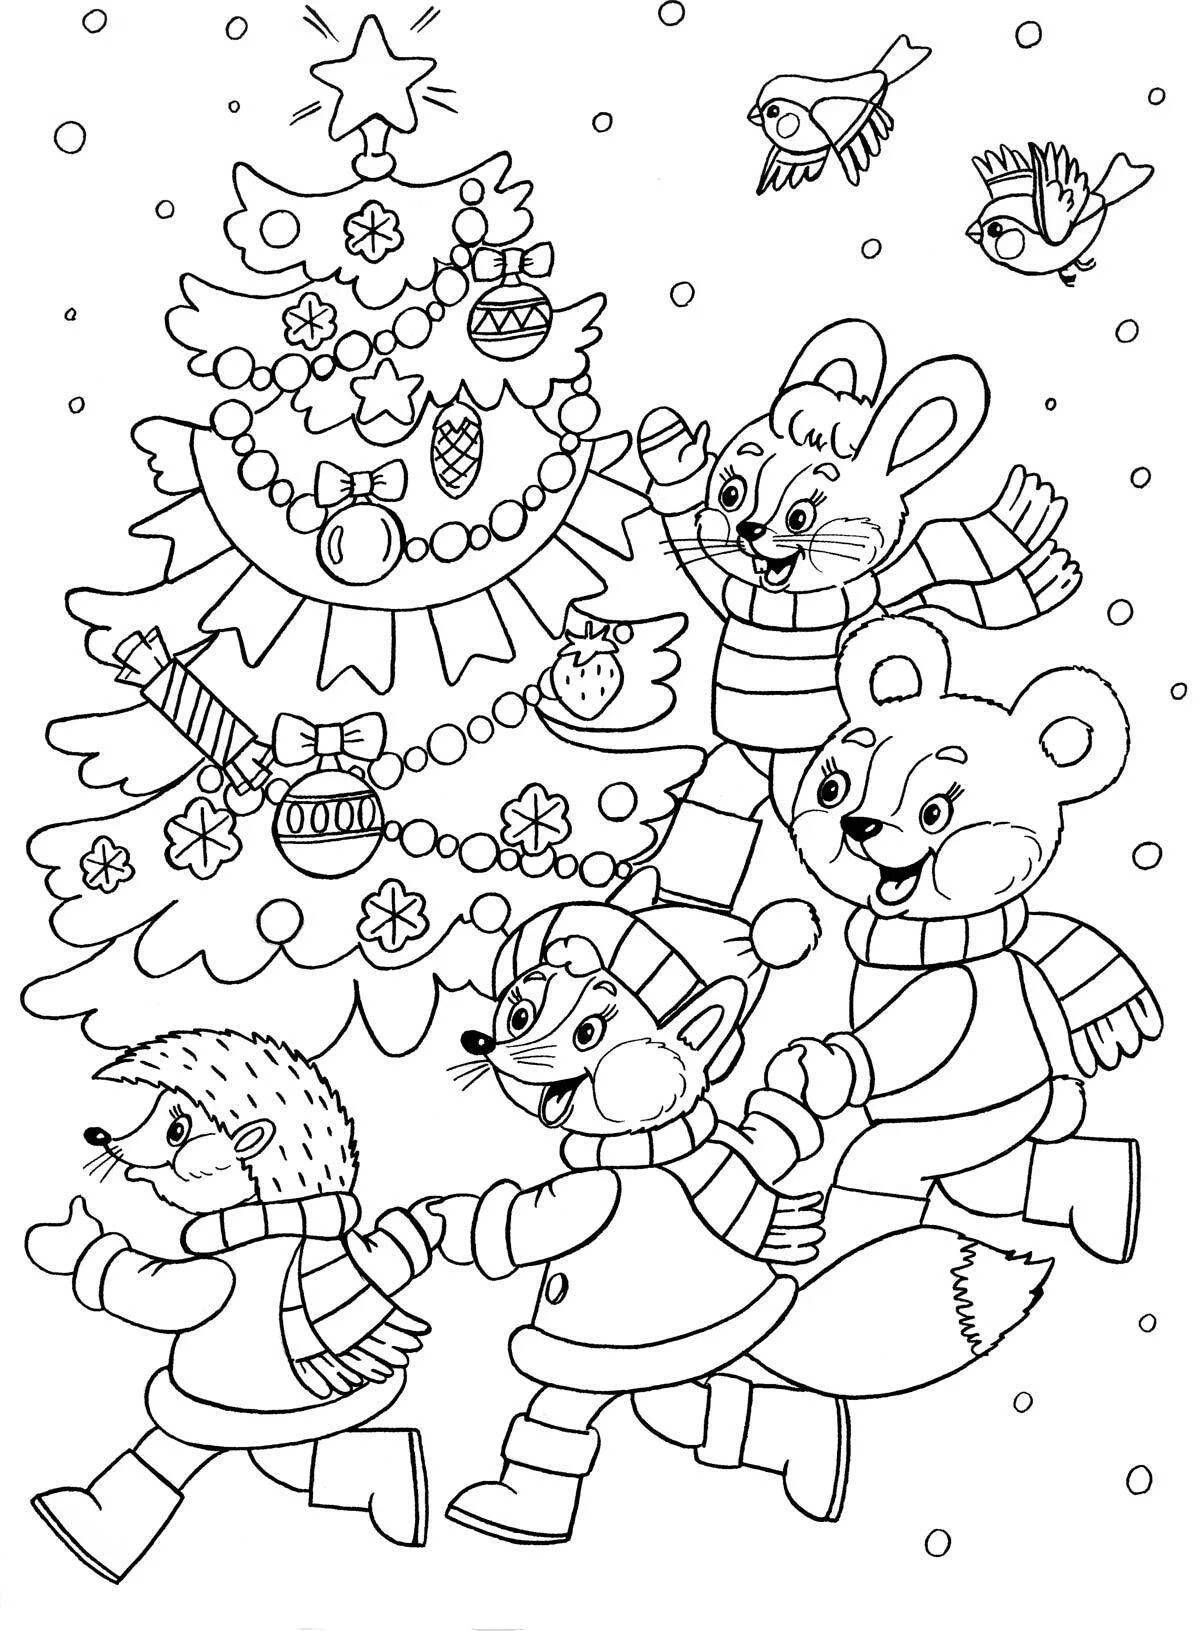 Coloring page glorious forest grew a Christmas tree